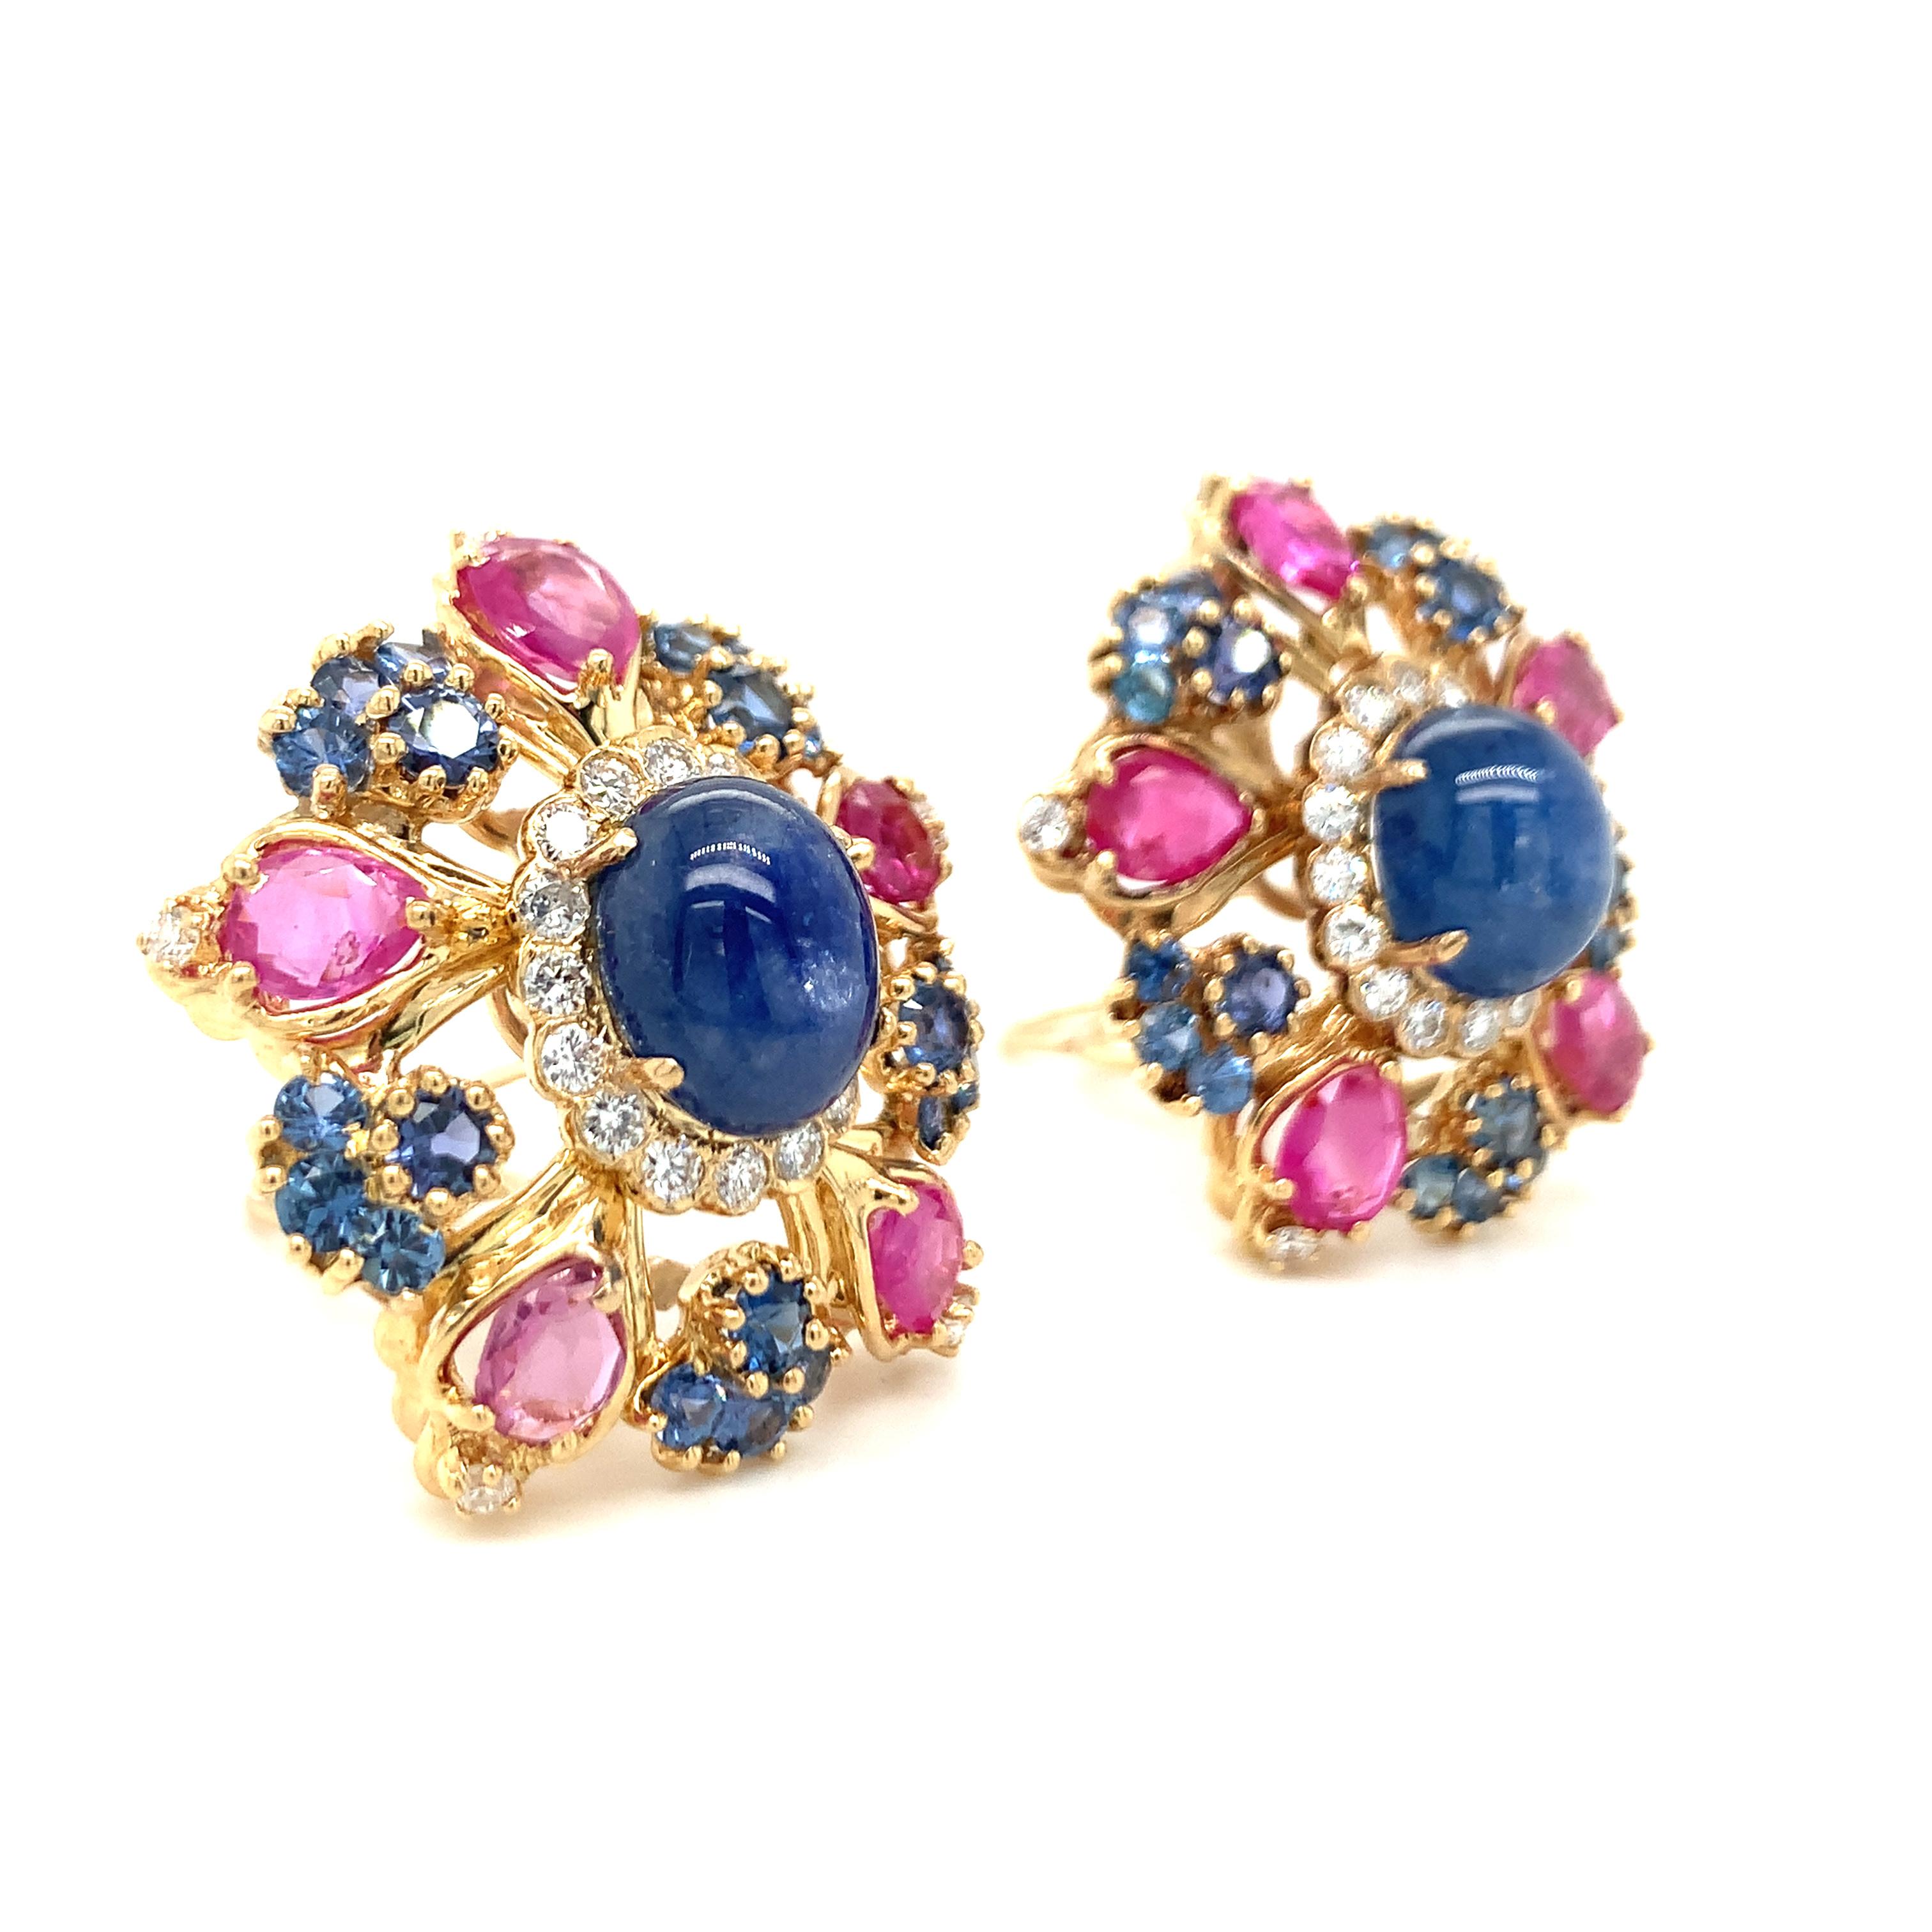 One pair of multi-gem set 18K yellow gold earrings centering two oval cabochon, blue sapphires totaling 12.50 ct. accented by 40 round brilliant cut blue sapphires weighing 5 ct. in total. The earrings are further accented by 10 marquise cut pink